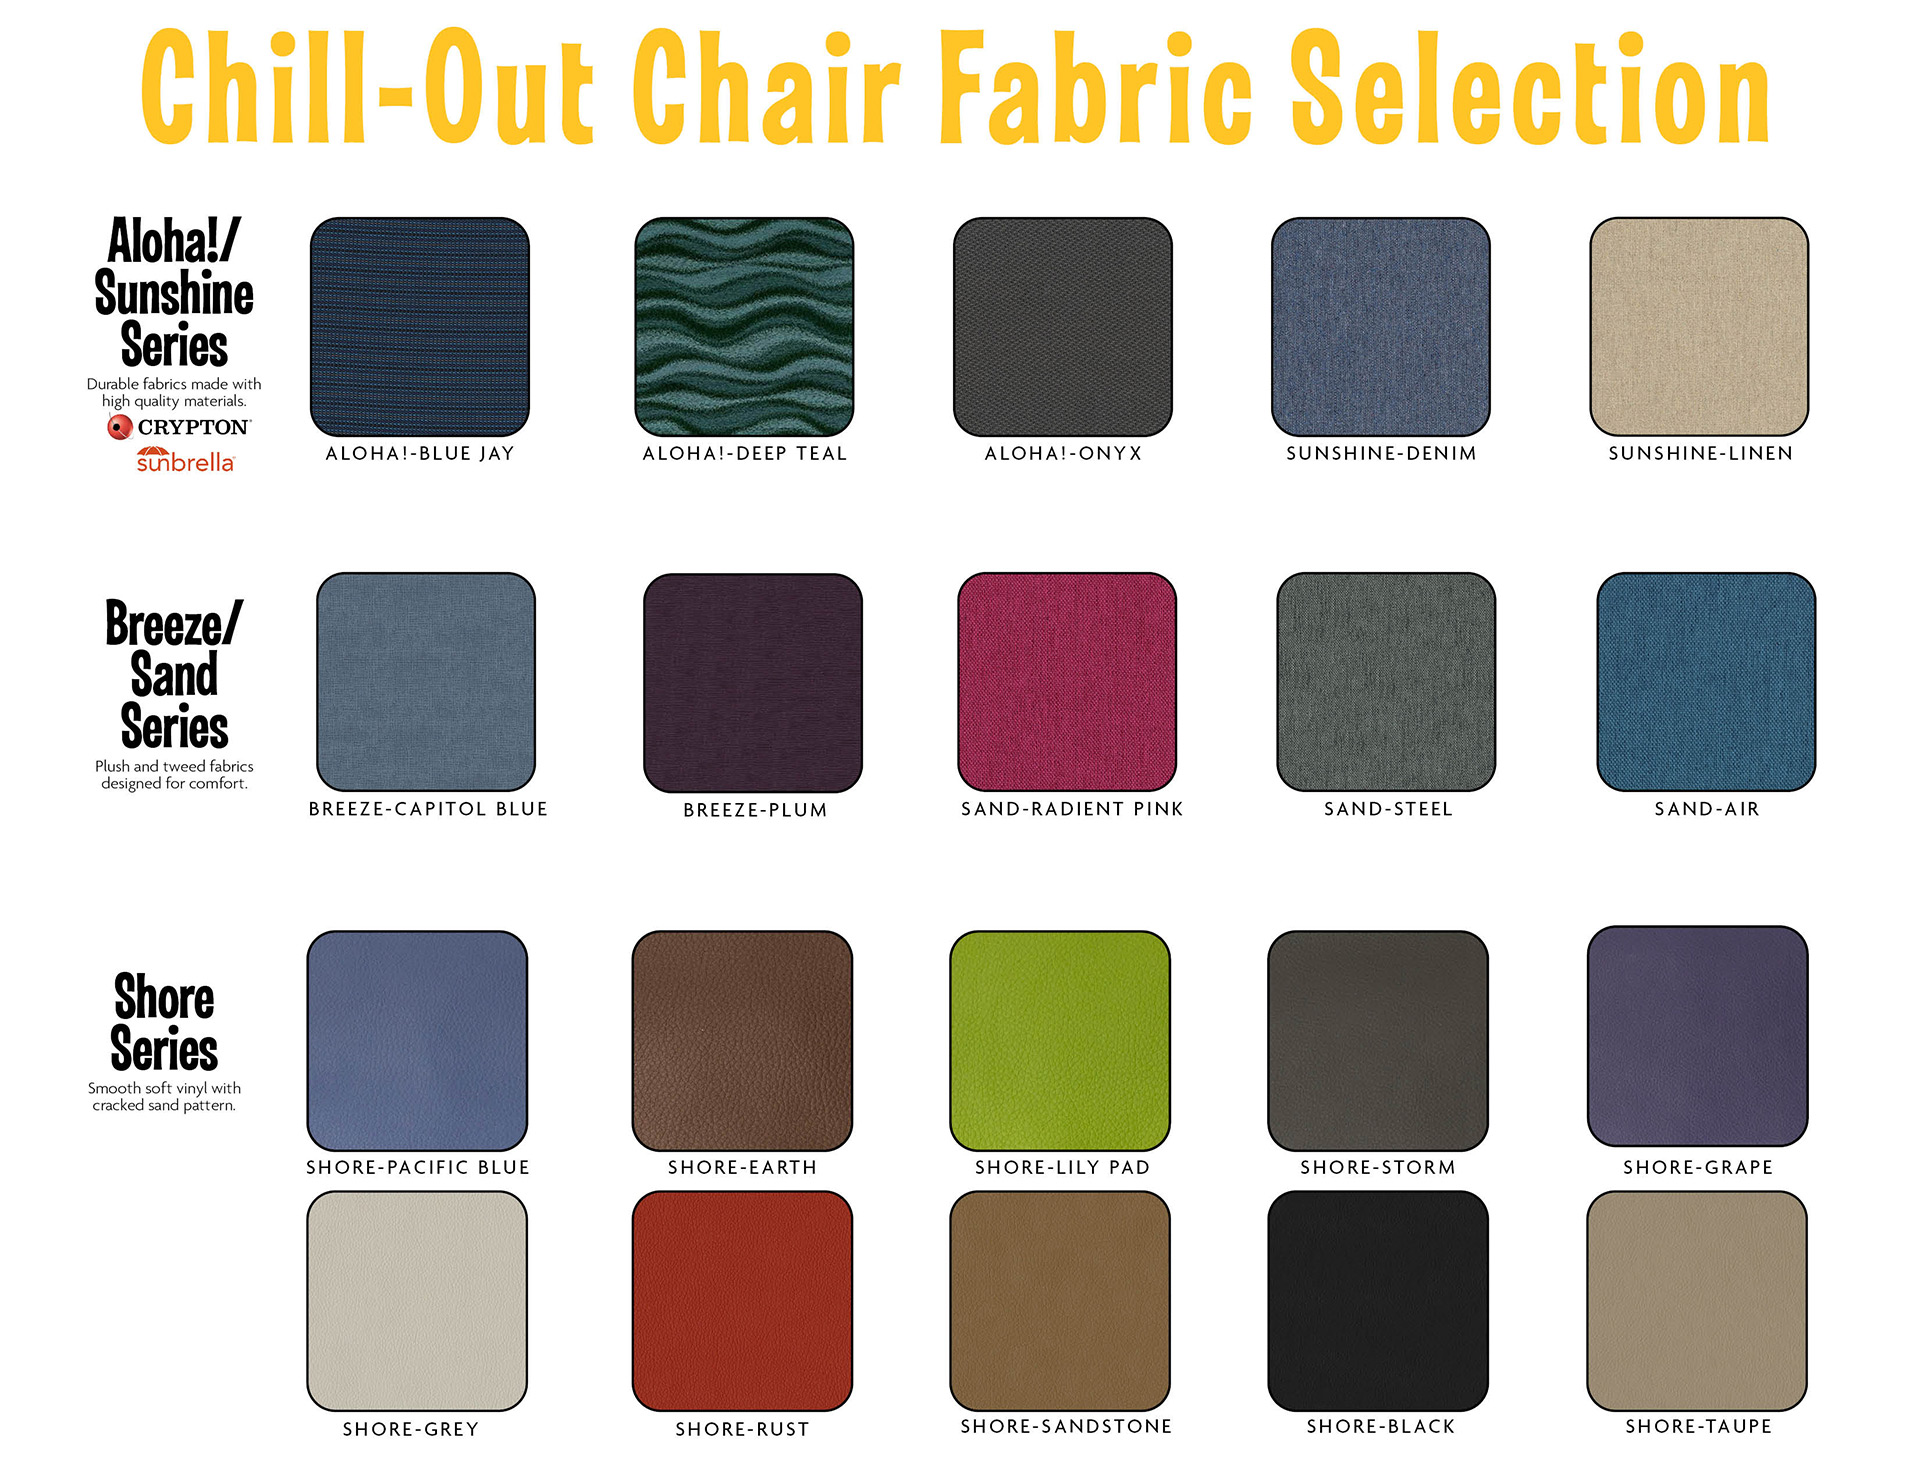 Chill-Out Chair Adaptive Seat Fabric Options